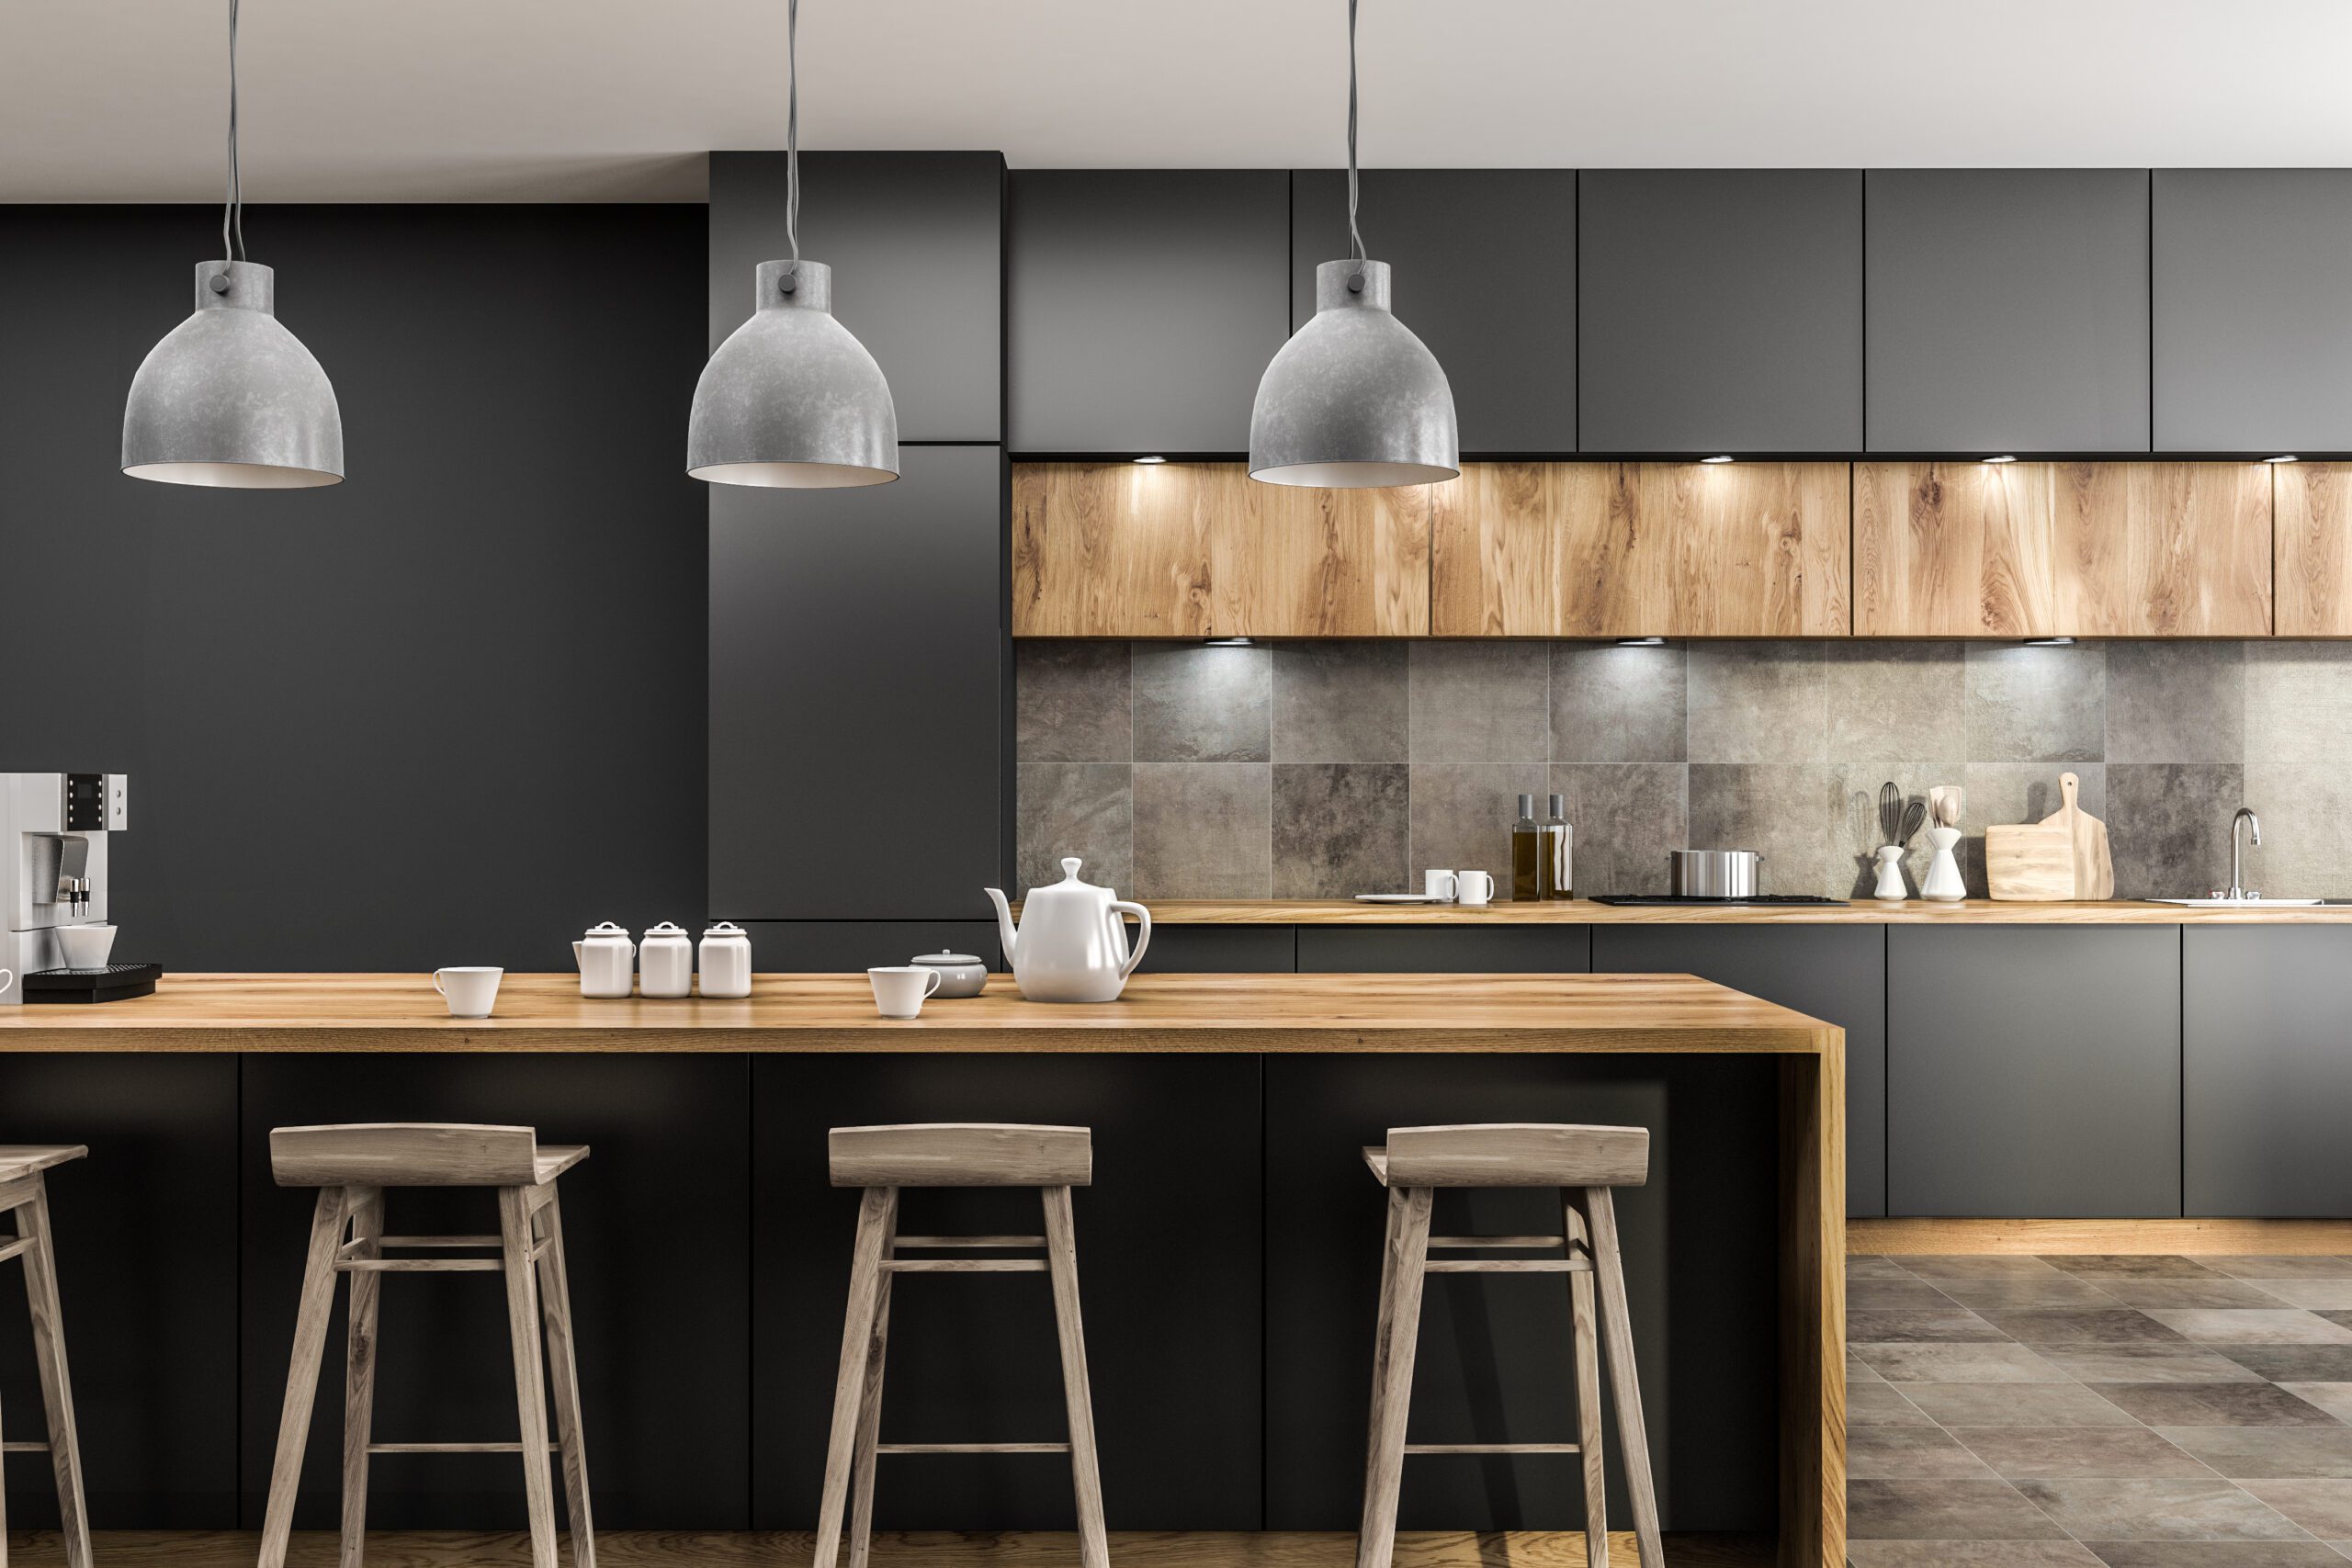 Modern kitchen interior with gray walls, tiled floor, gray countertops and wooden bar with stools. 3d rendering